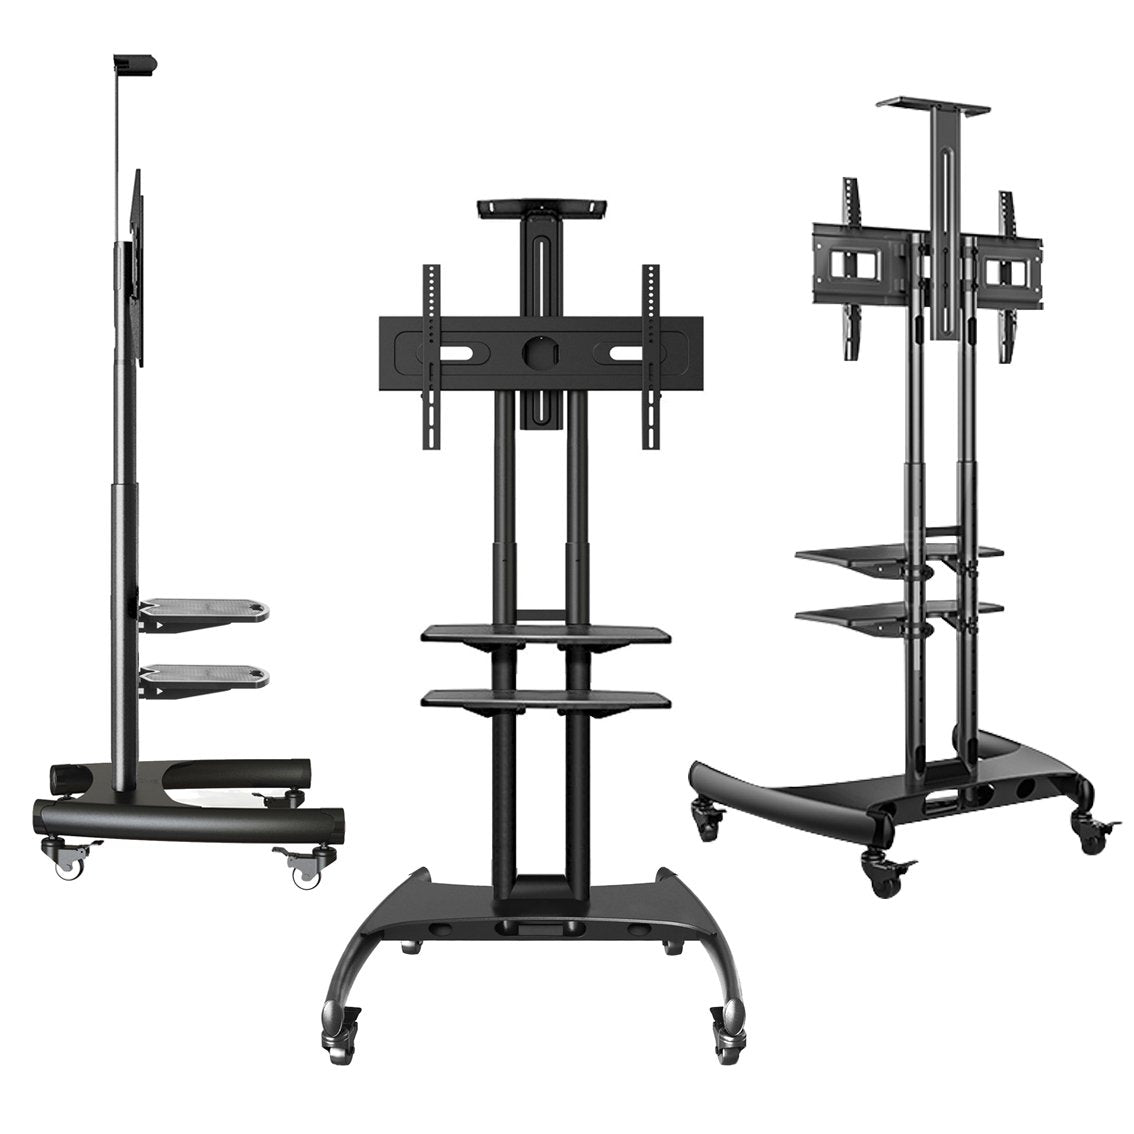 ONKRON Mobile Universal TV Cart TV Stand  for  32”-65” Screens up to 100 lbs, TS1562 Black